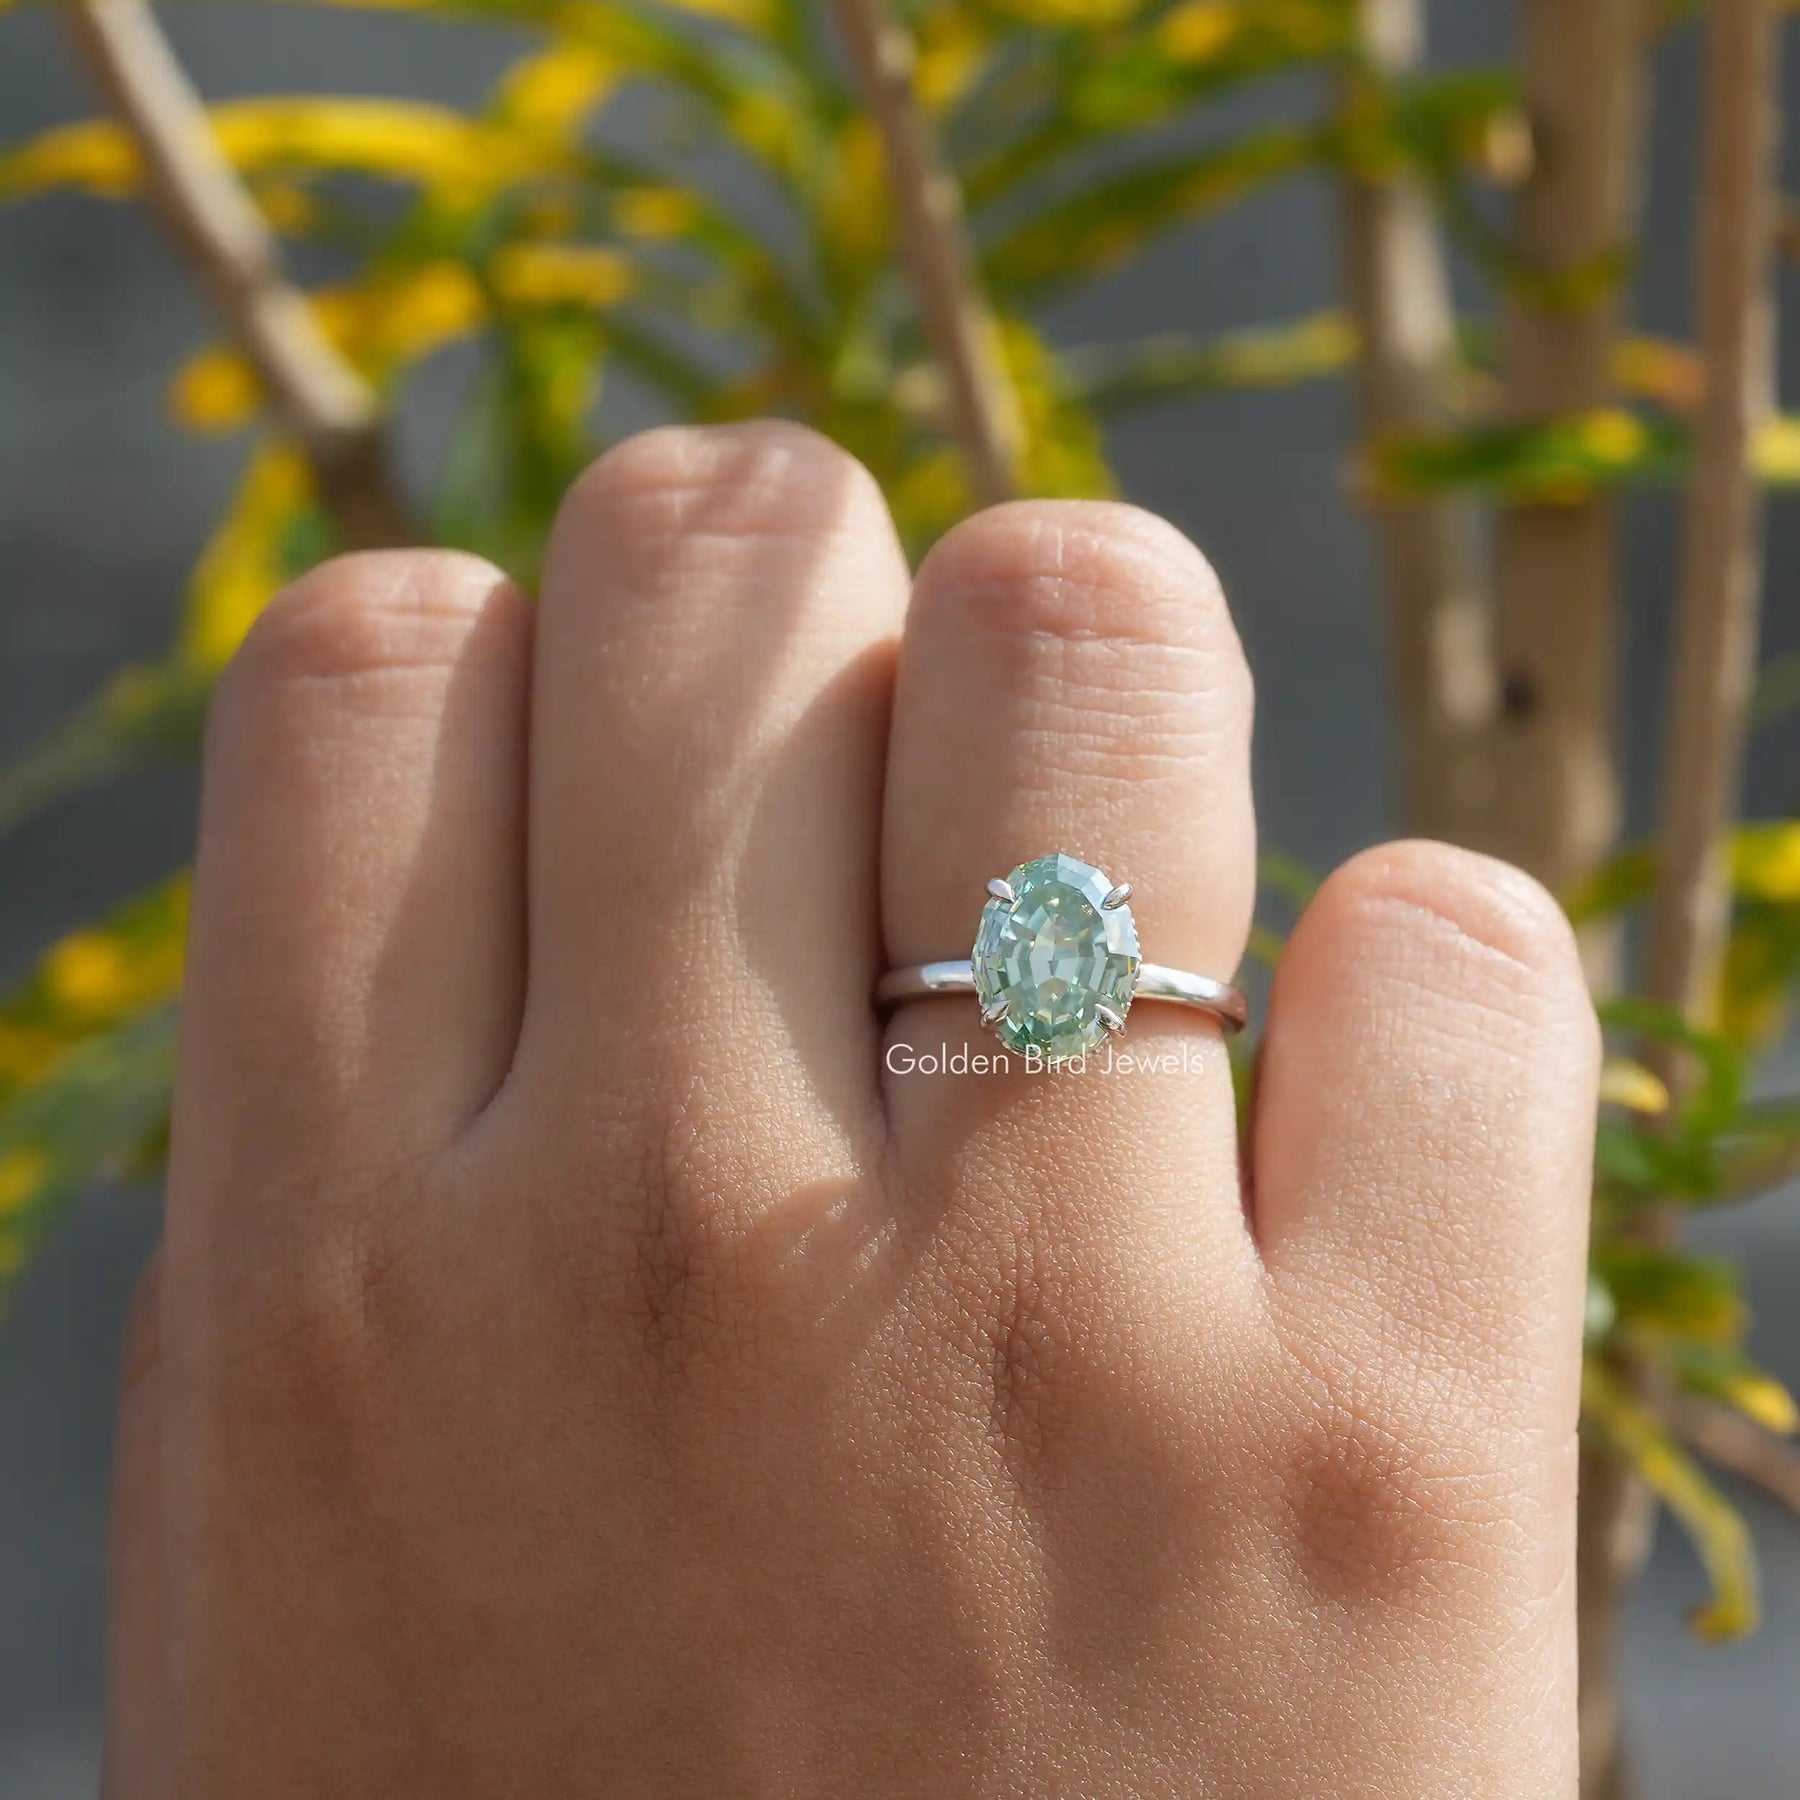 [Blue Oval Cut Moissanite Solitaire Engagement Ring]-[Golden Bird Jewels]